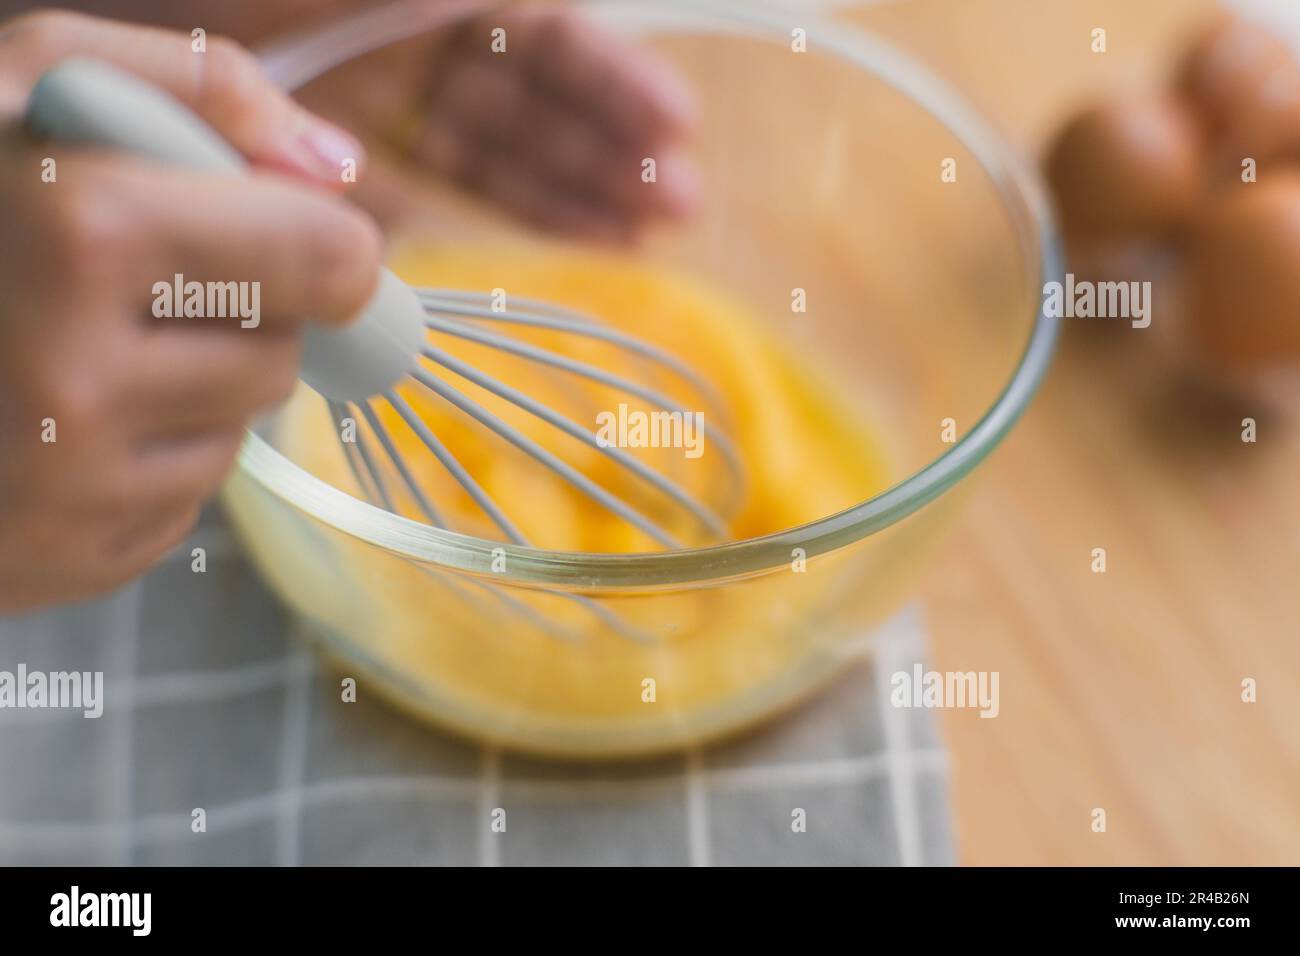 https://c8.alamy.com/comp/2R4B26N/young-woman-cooking-in-bright-kitchen-hands-whisking-eggs-in-a-bowl-placed-on-towel-and-wooden-table-preparing-ingredients-for-healthy-cooking-home-2R4B26N.jpg